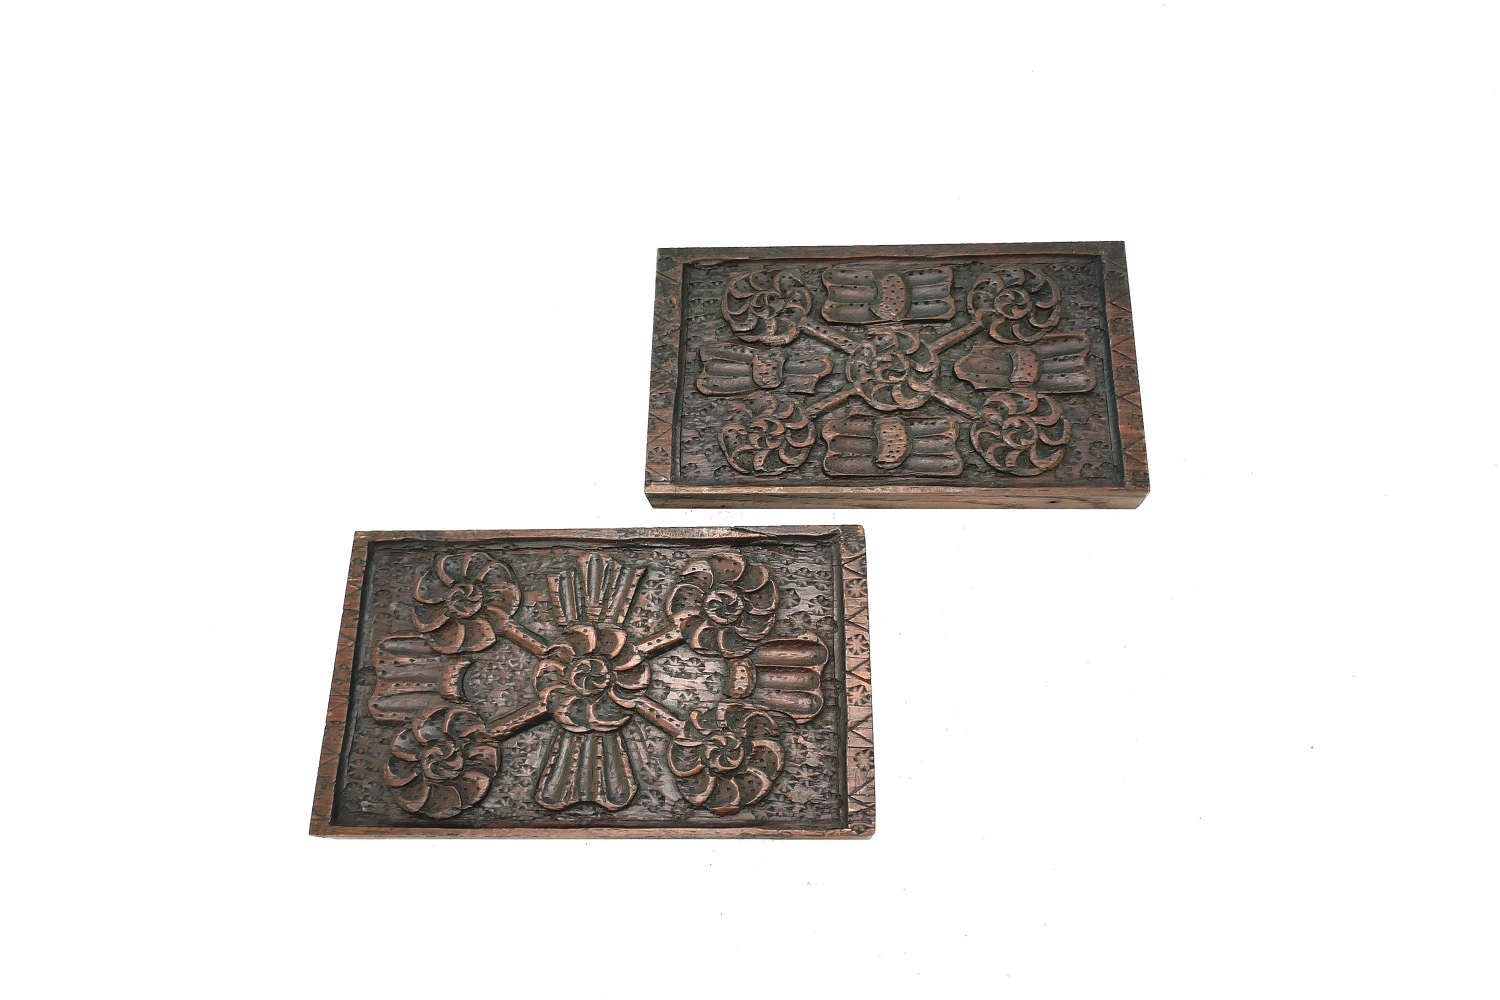 Antique Pair Of 17thc Oak Carved Panels With Floral Decoration. C1640